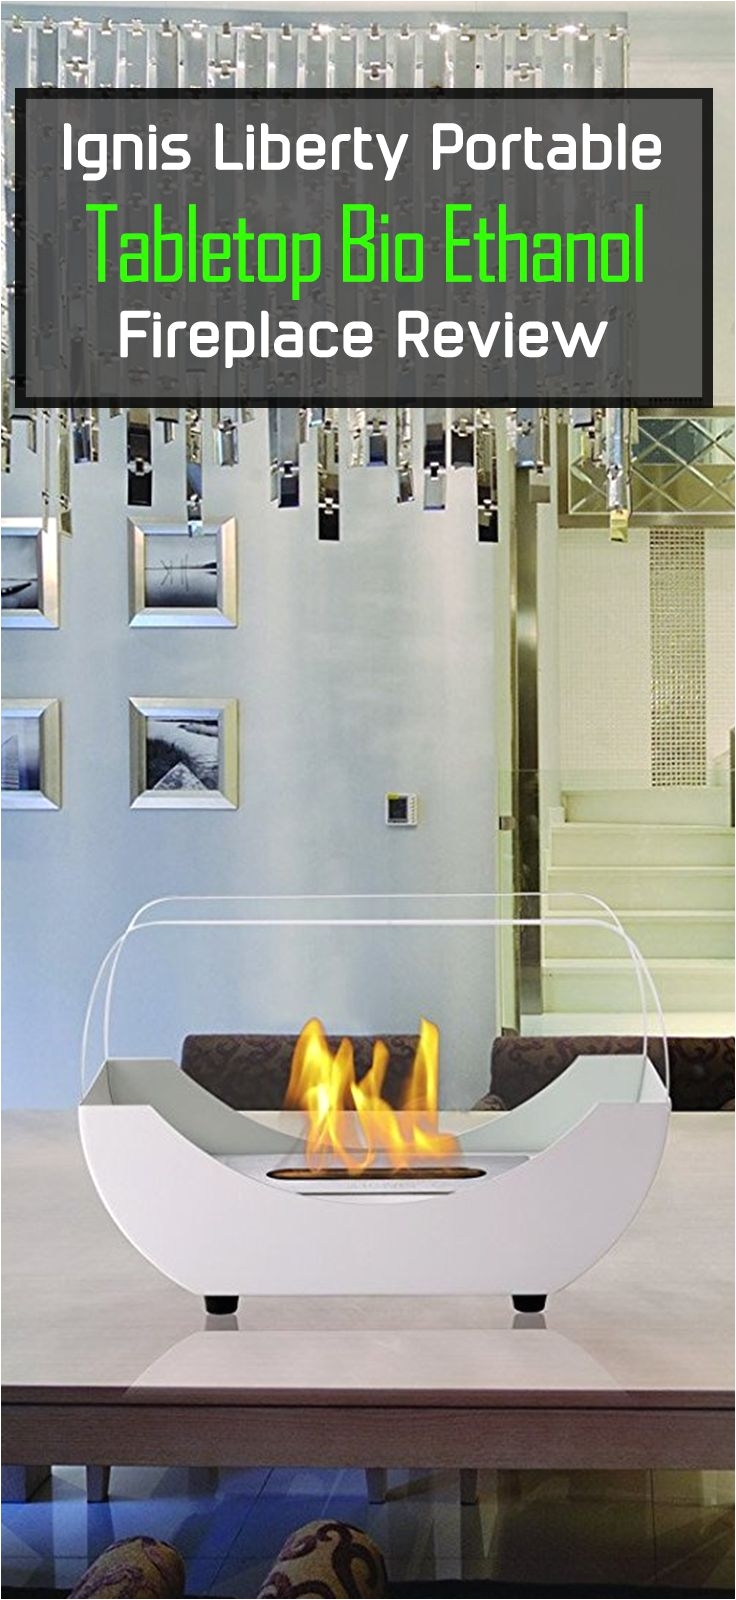 this portable tabletop bio ethanol fireplace takes on a fuller design that closely resembles a cradle style